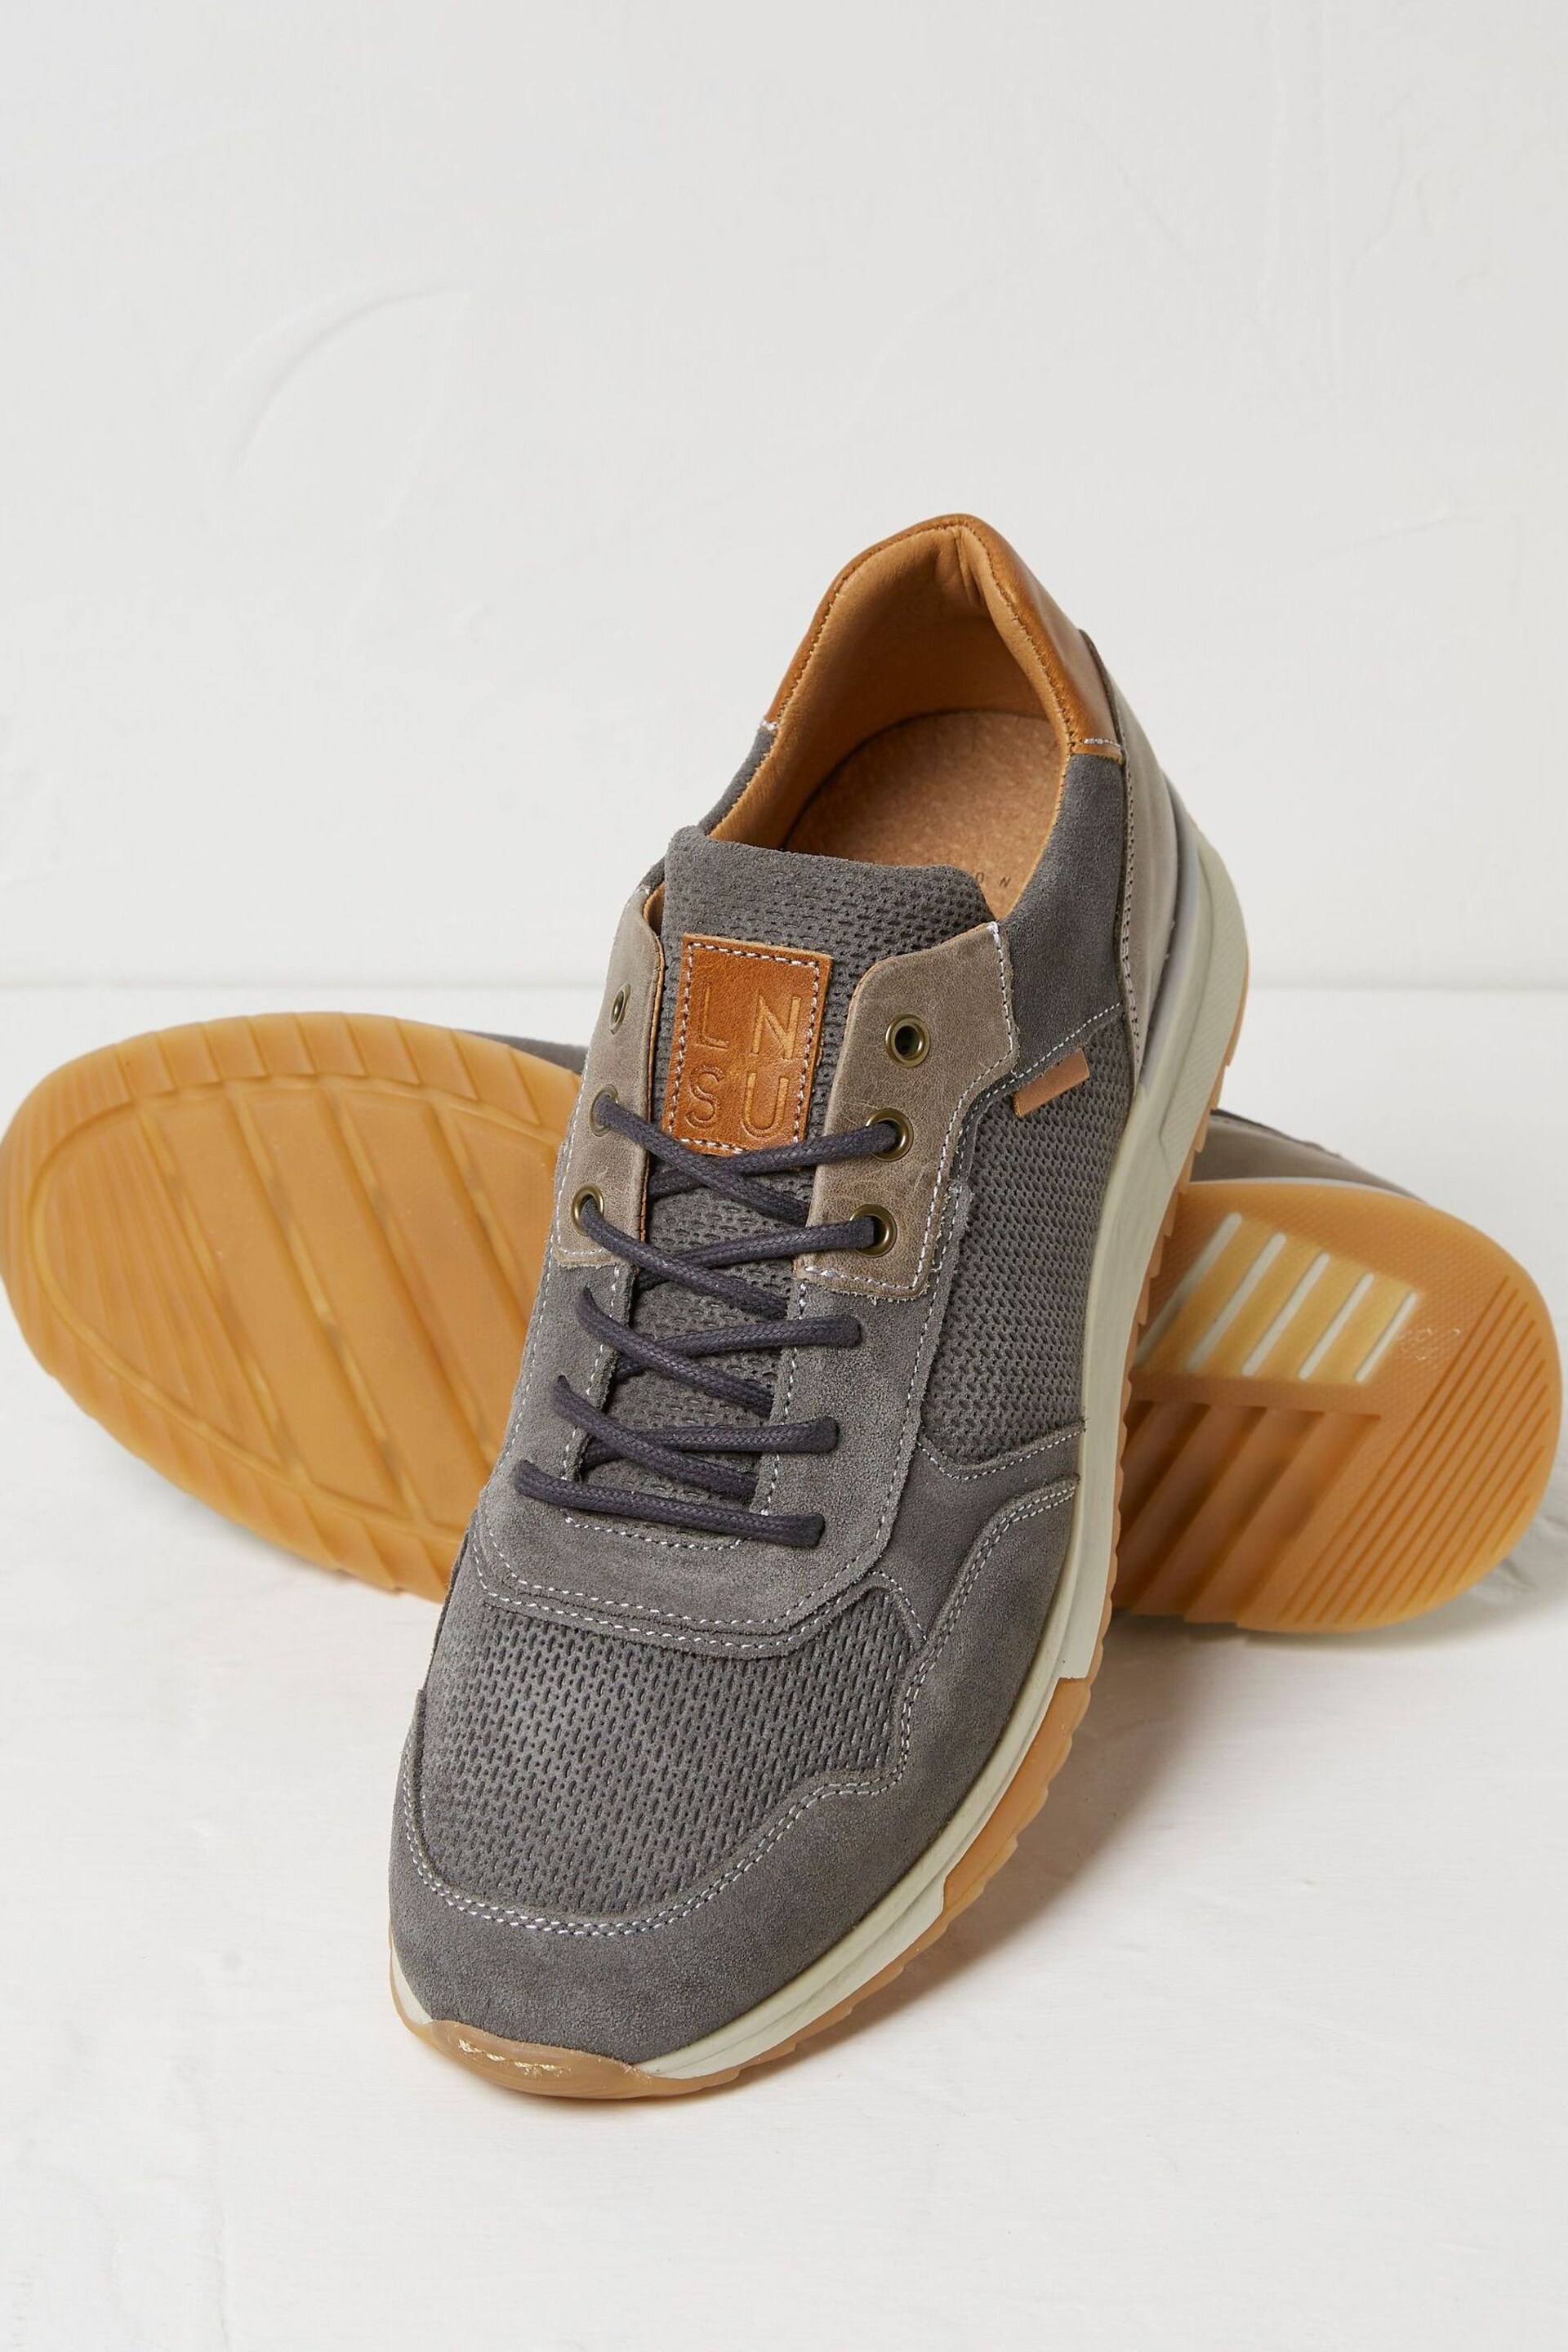 FatFace Grey Leather Runner Trainers - Image 2 of 3